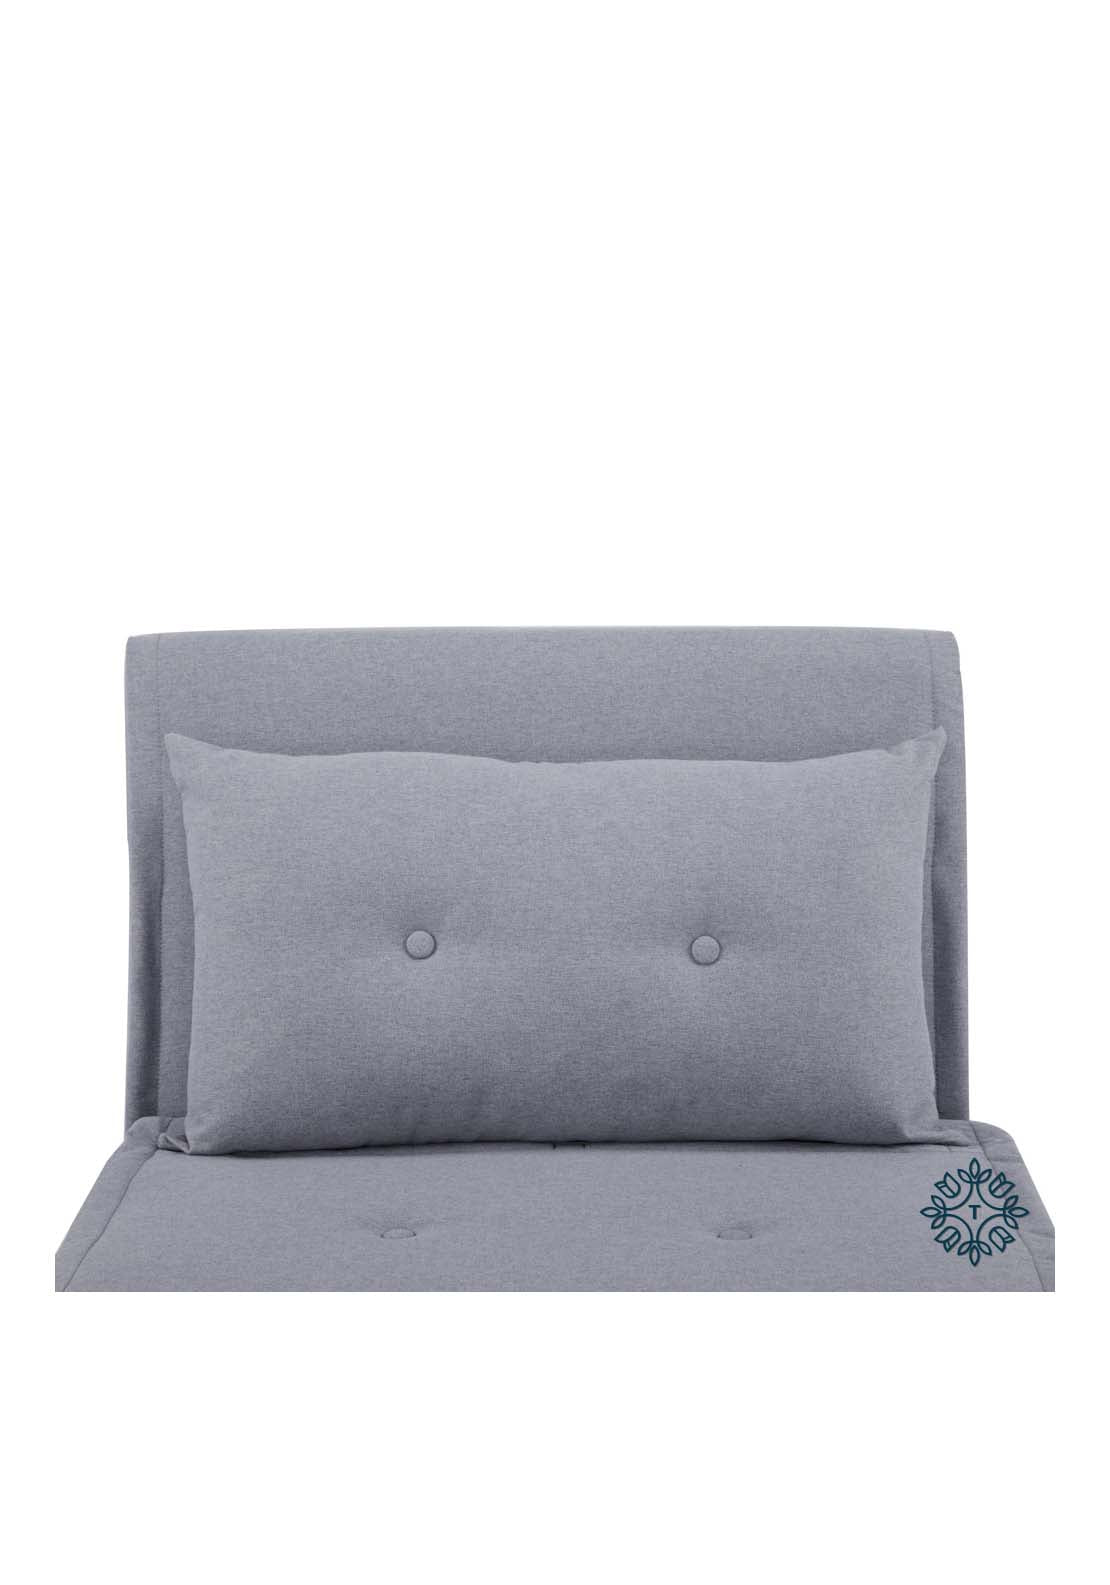 The Home Collection Haru Single Sofa Bed - Grey 6 Shaws Department Stores